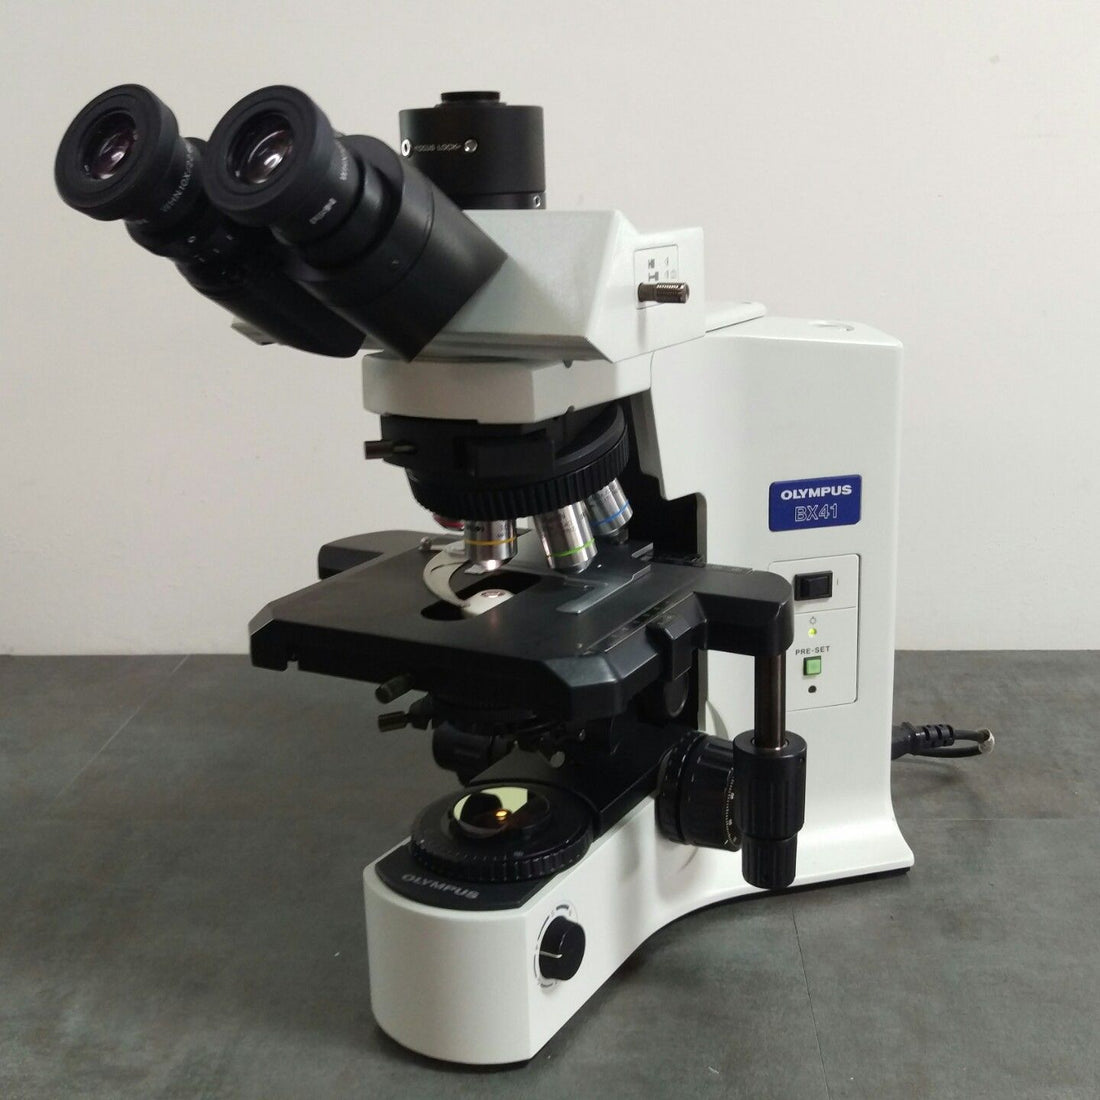 Why are microscopes used in Pathology?